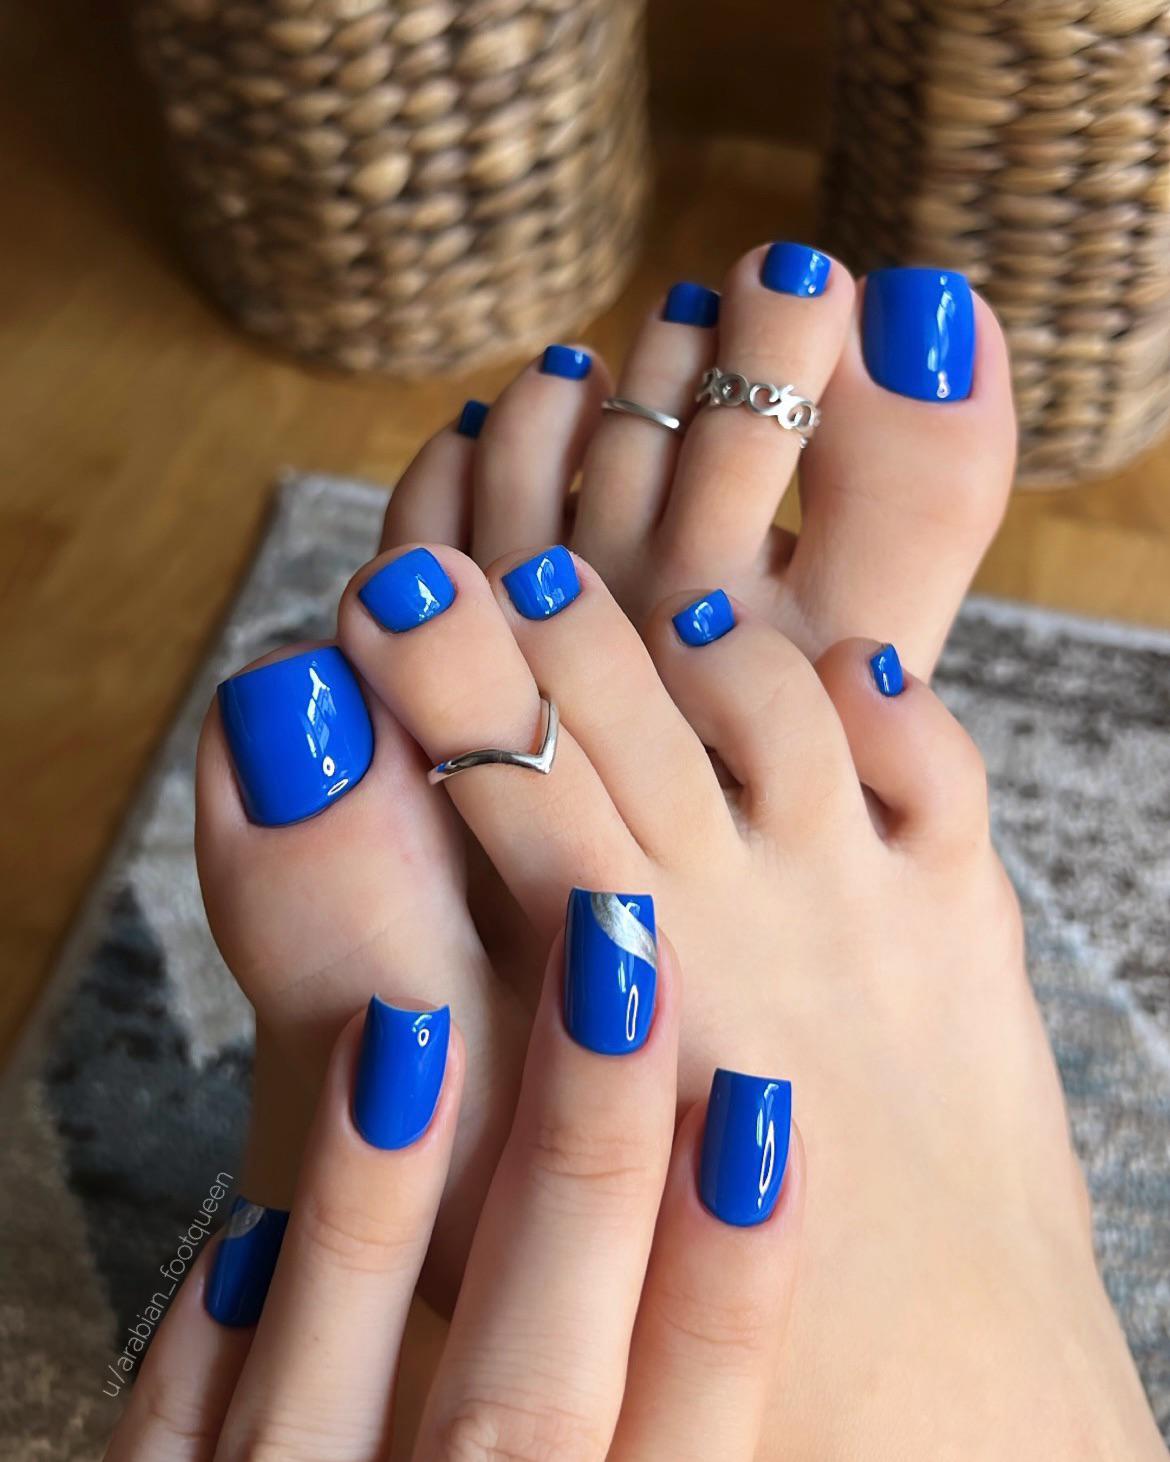 Blue pedicure and toe rings